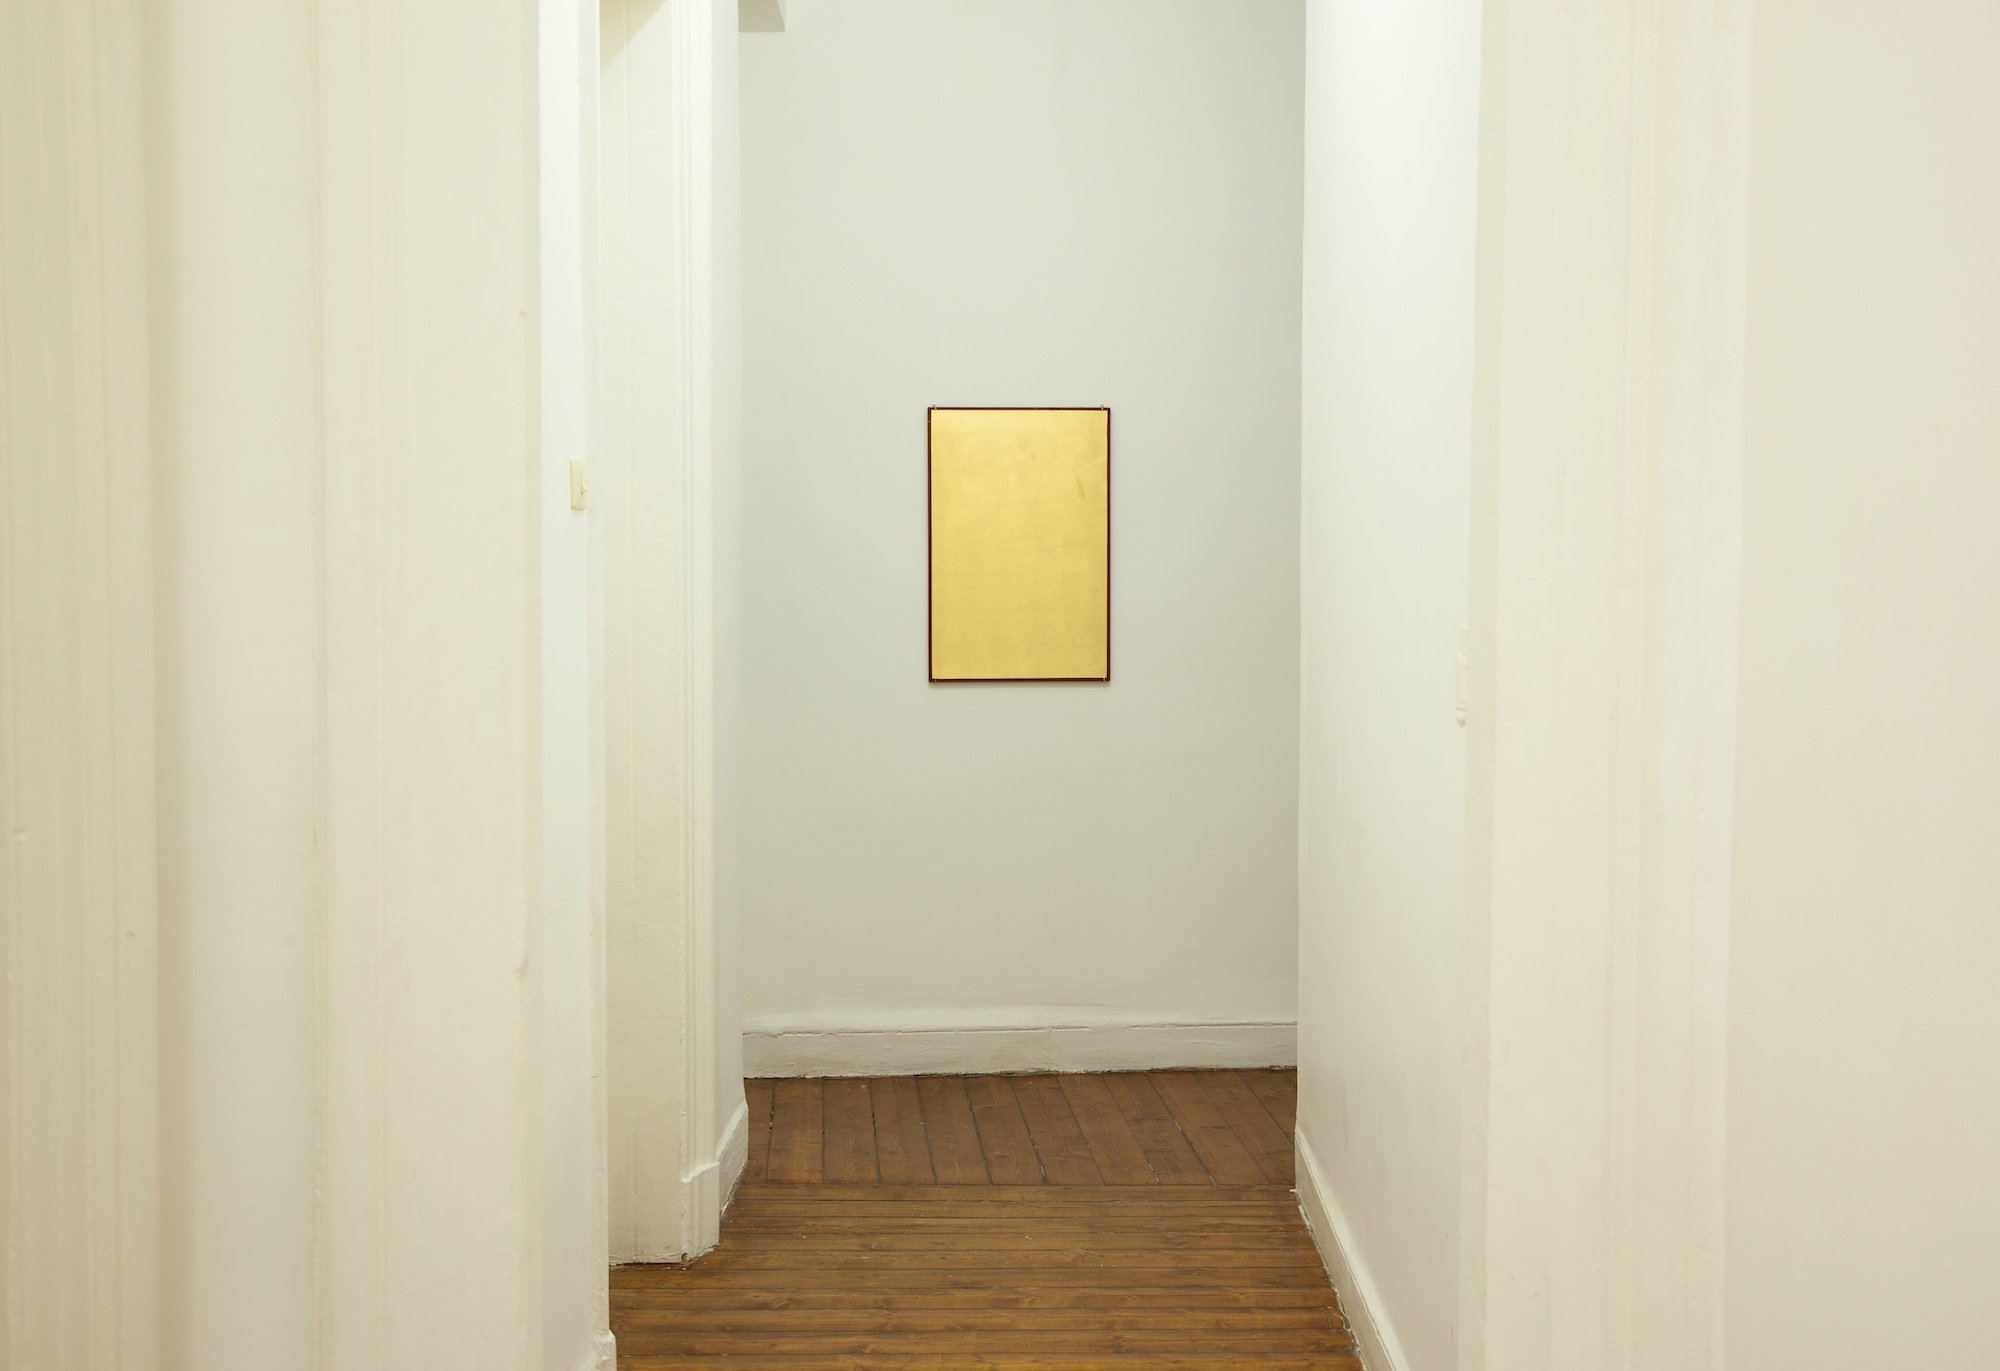 Christodoulos Panayiotou, Untitled, painting and gold on wood, 50 x 75 cm, 2012. Installation view, Tenuto, Rodeo, Istanbul, 2012 – 2013